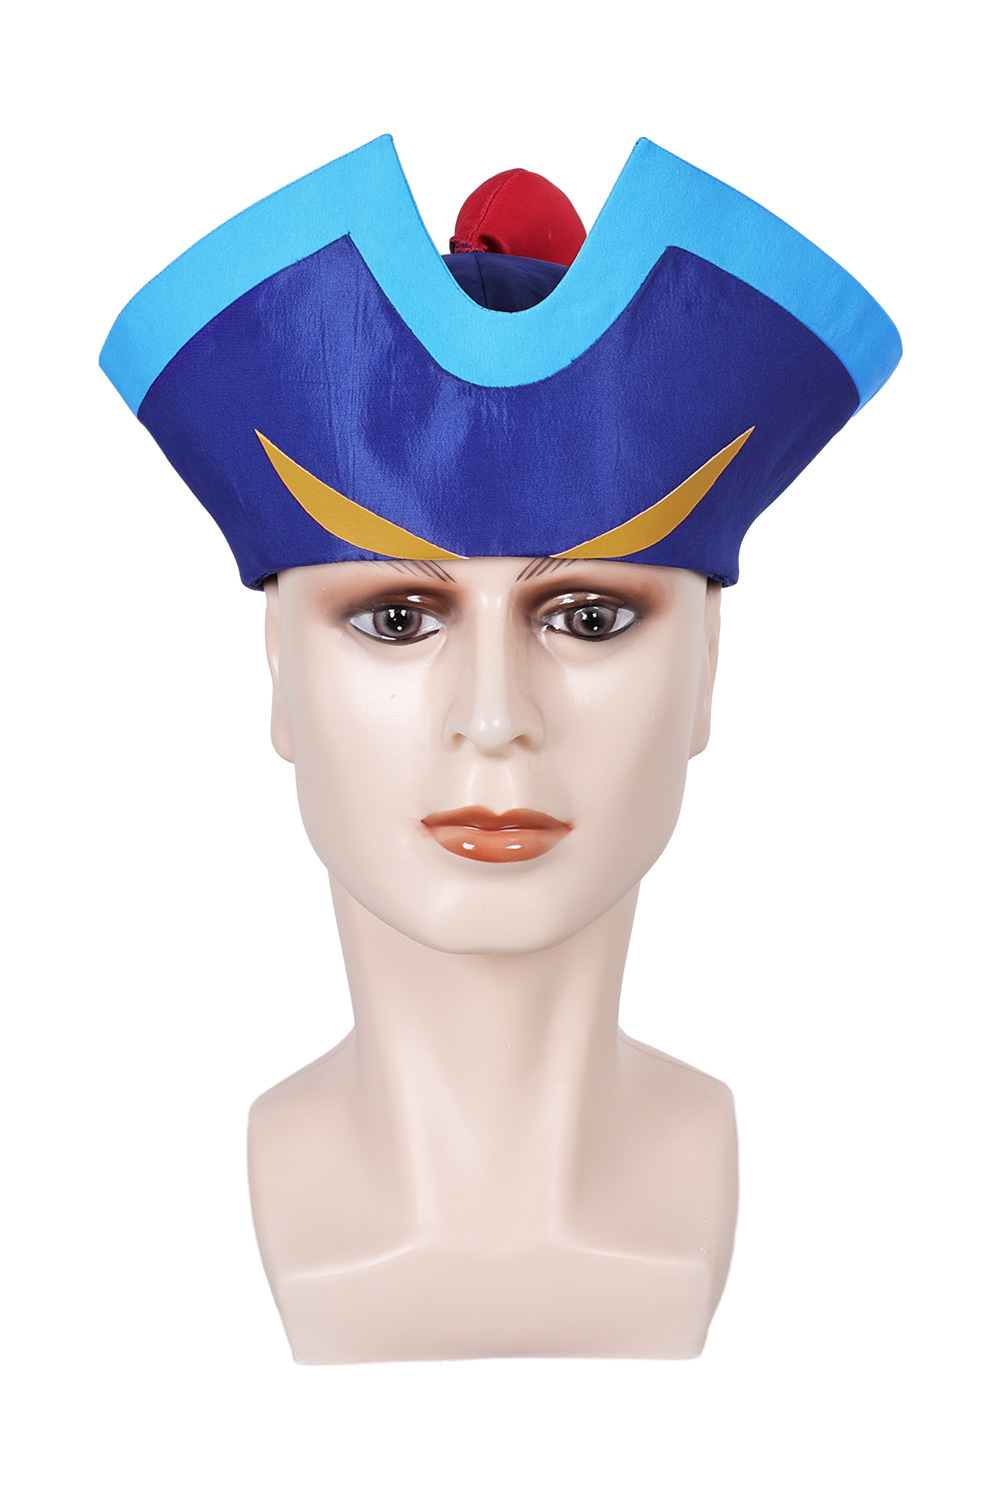 Game Palworld Penking Blue Cosplay Hat Halloween Costume Accessories Props